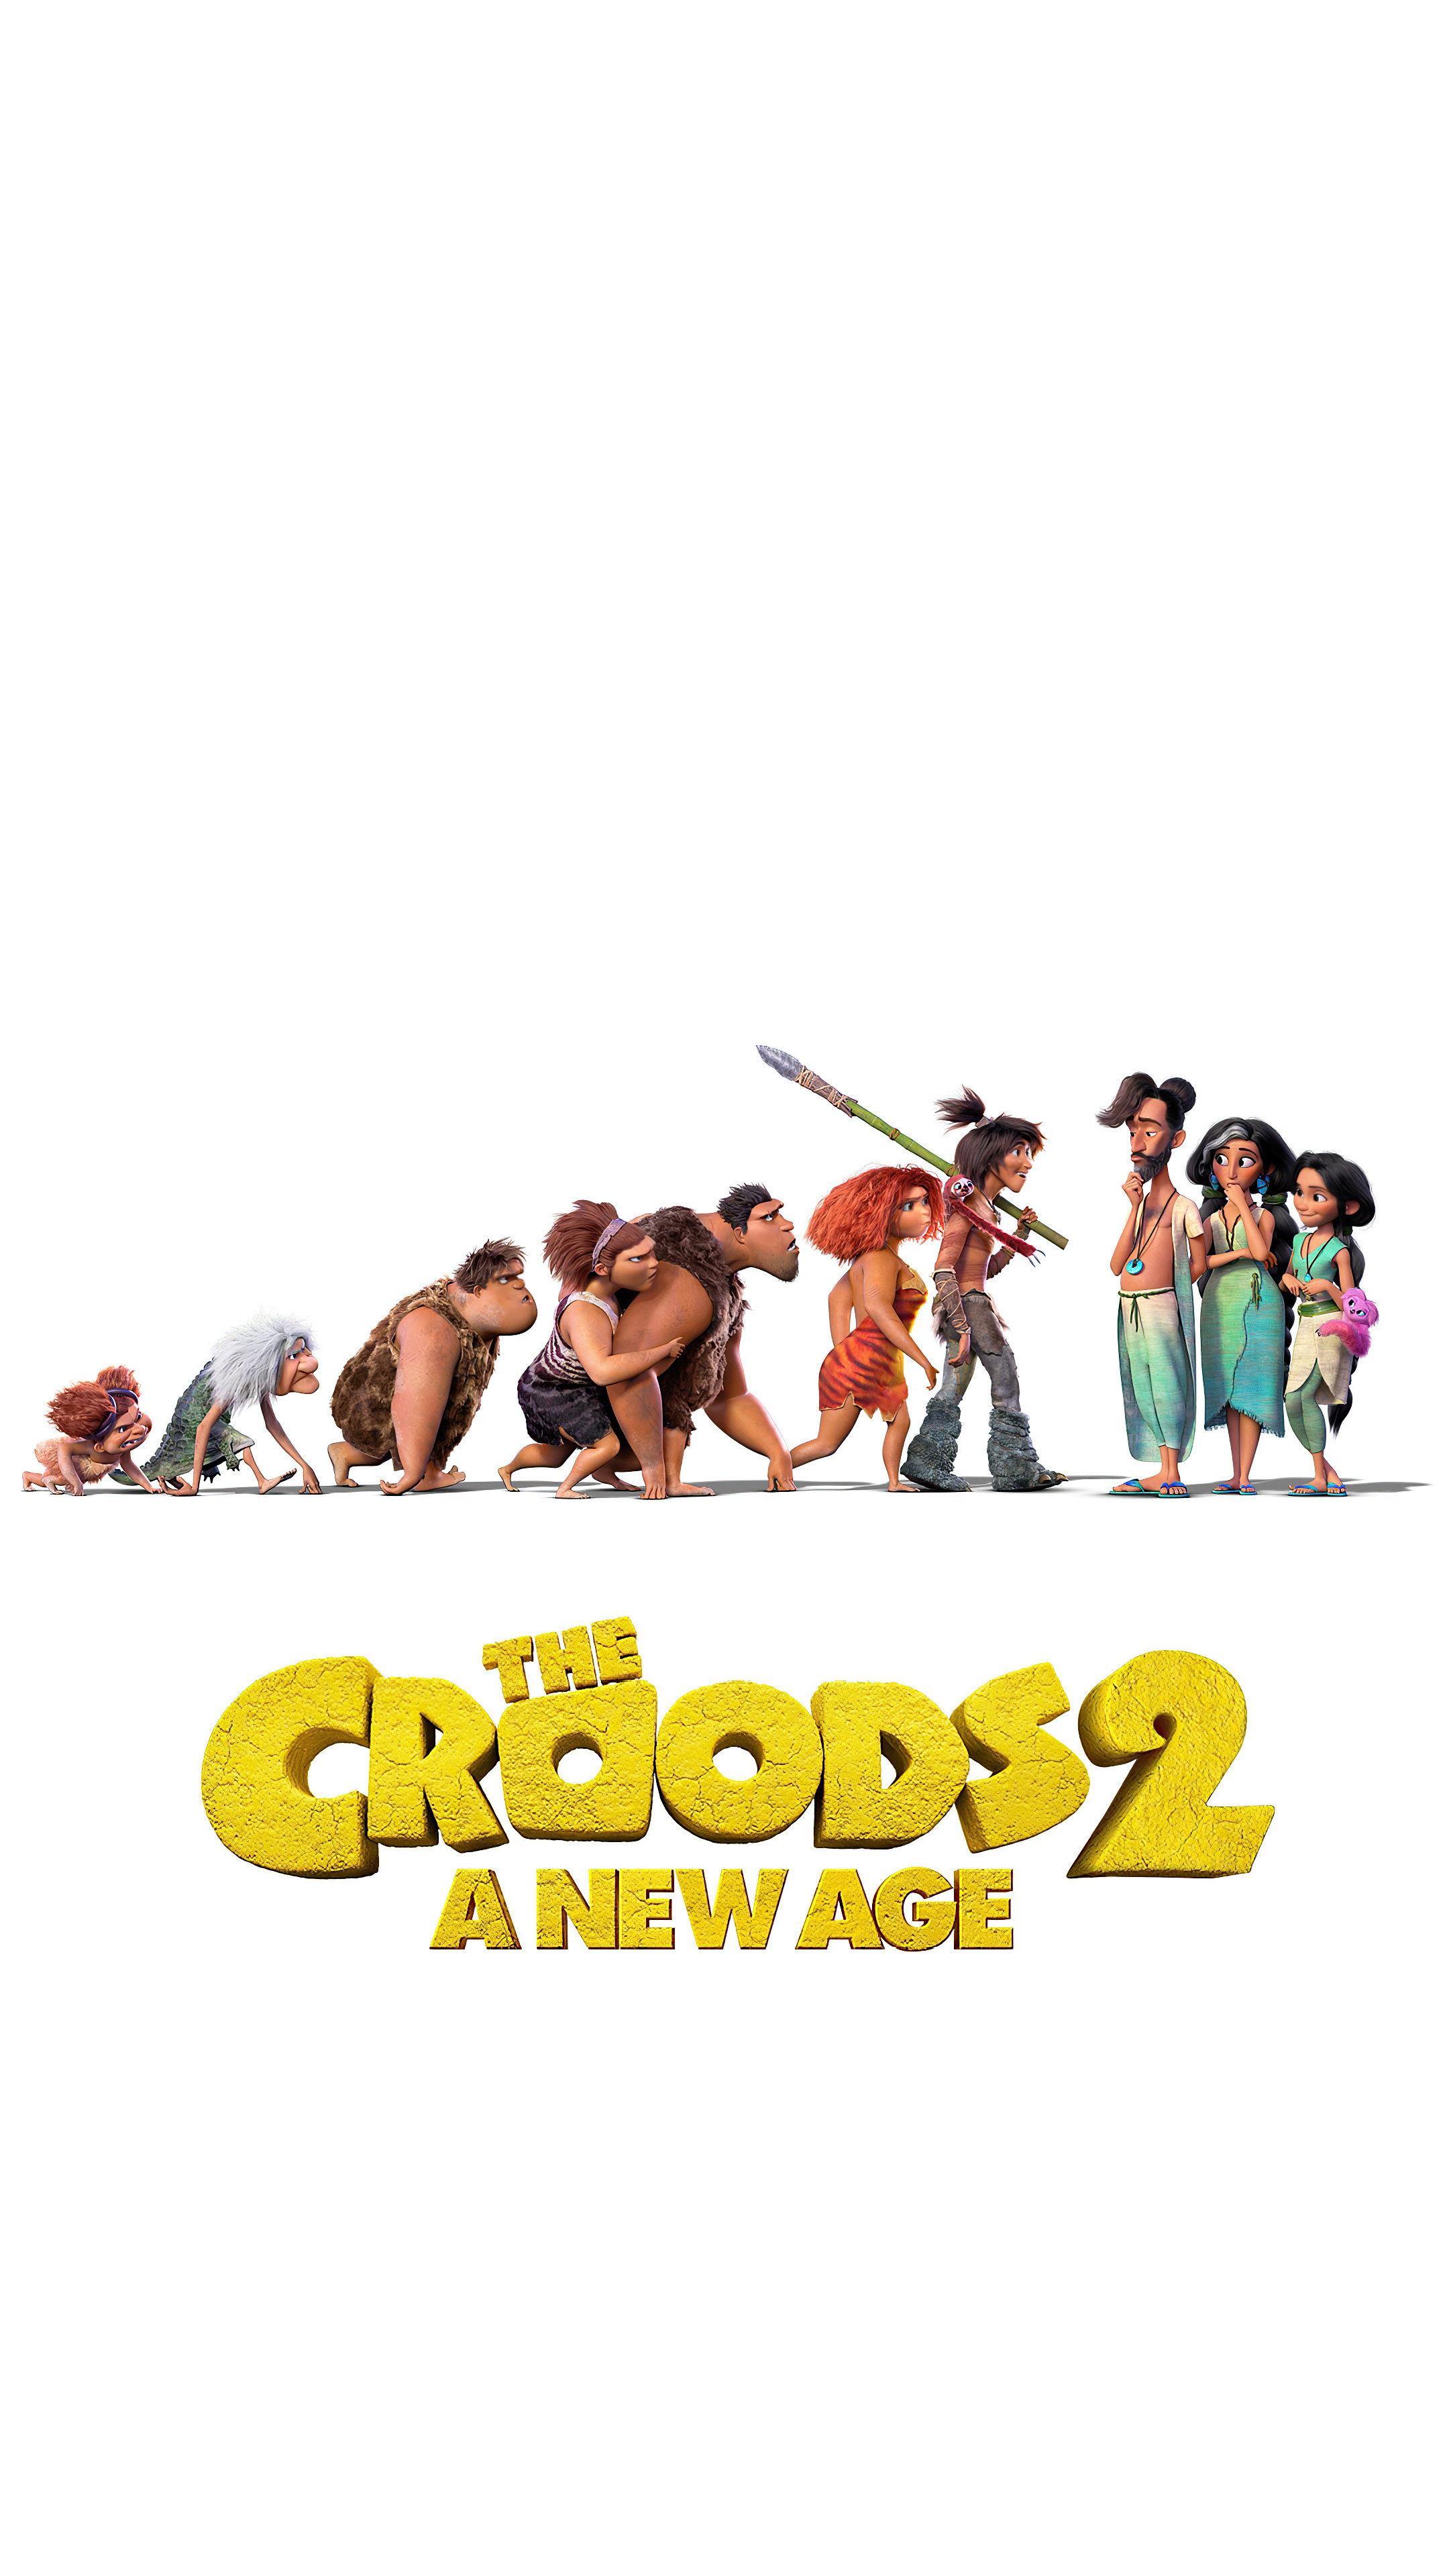 The Croods: A New Age wallpapers, Sony Xperia wallpapers, 12K resolution, Crystal-clear visuals, 2160x3840 4K Handy